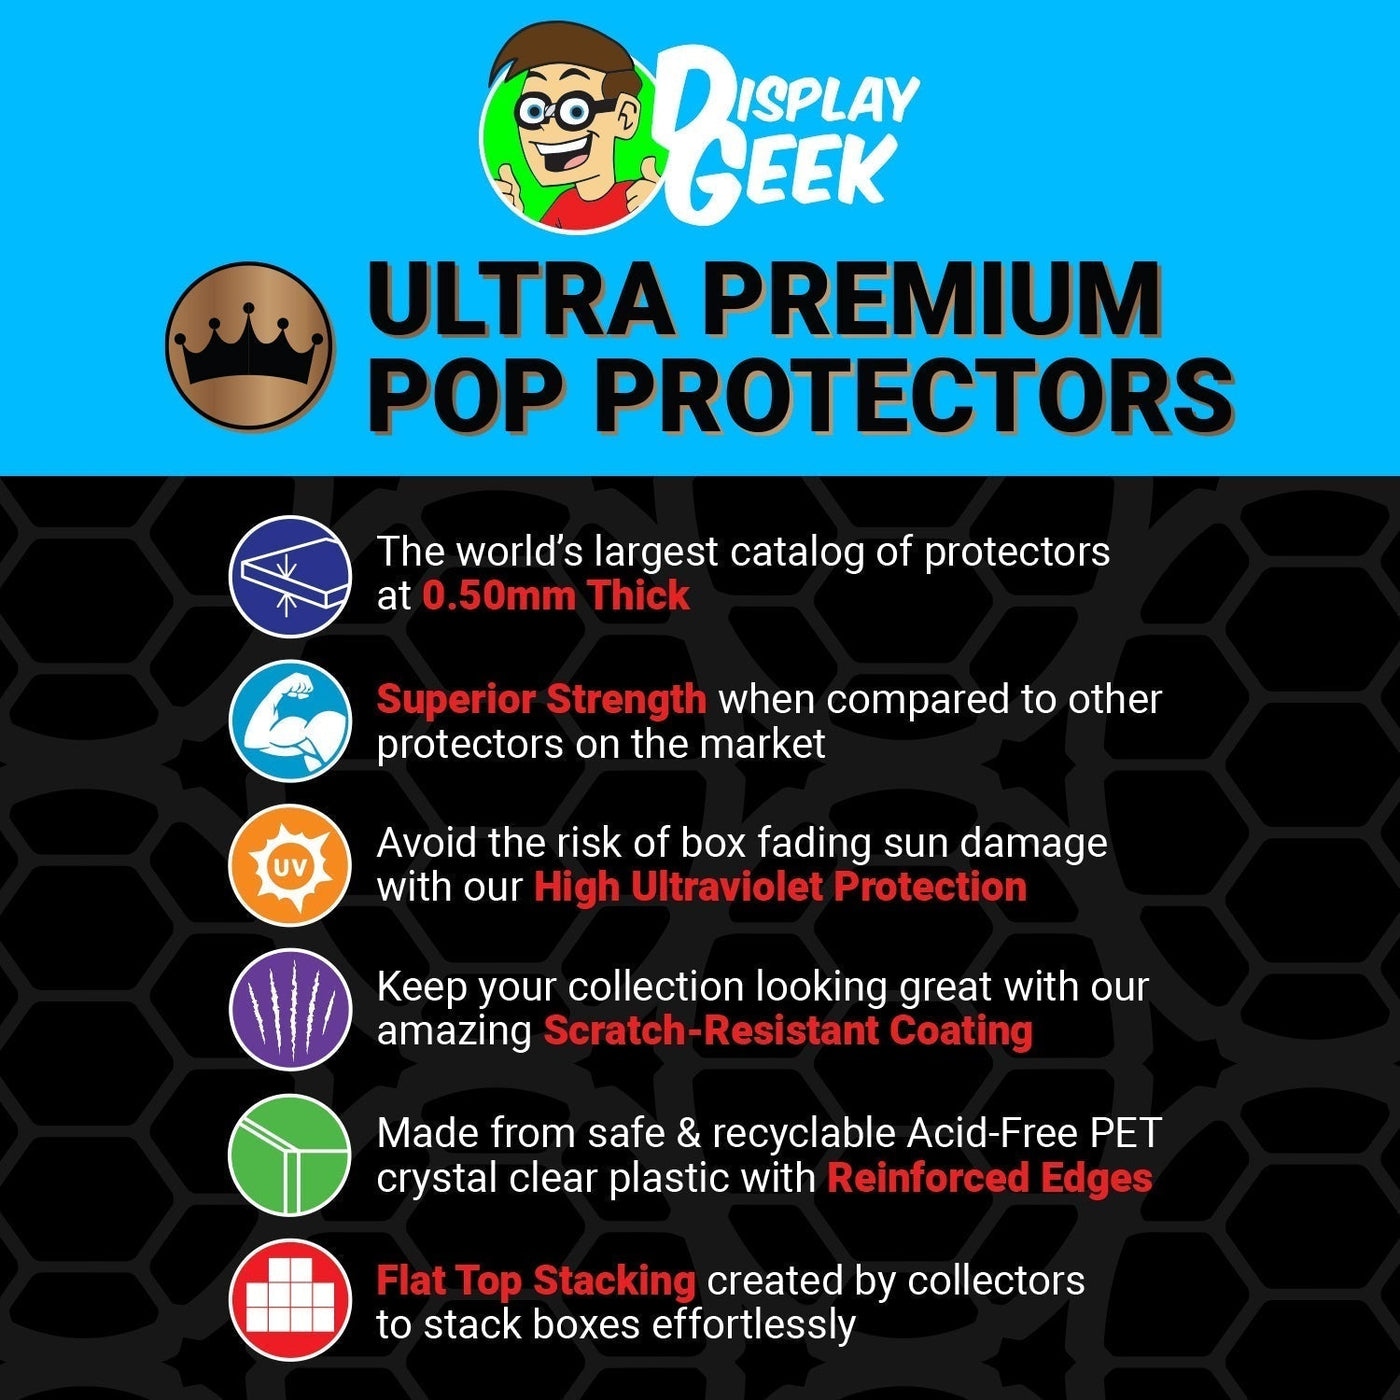 Pop Protector for Rick Sanchez FunkO's Cereal Box on The Protector Guide App by Display Geek